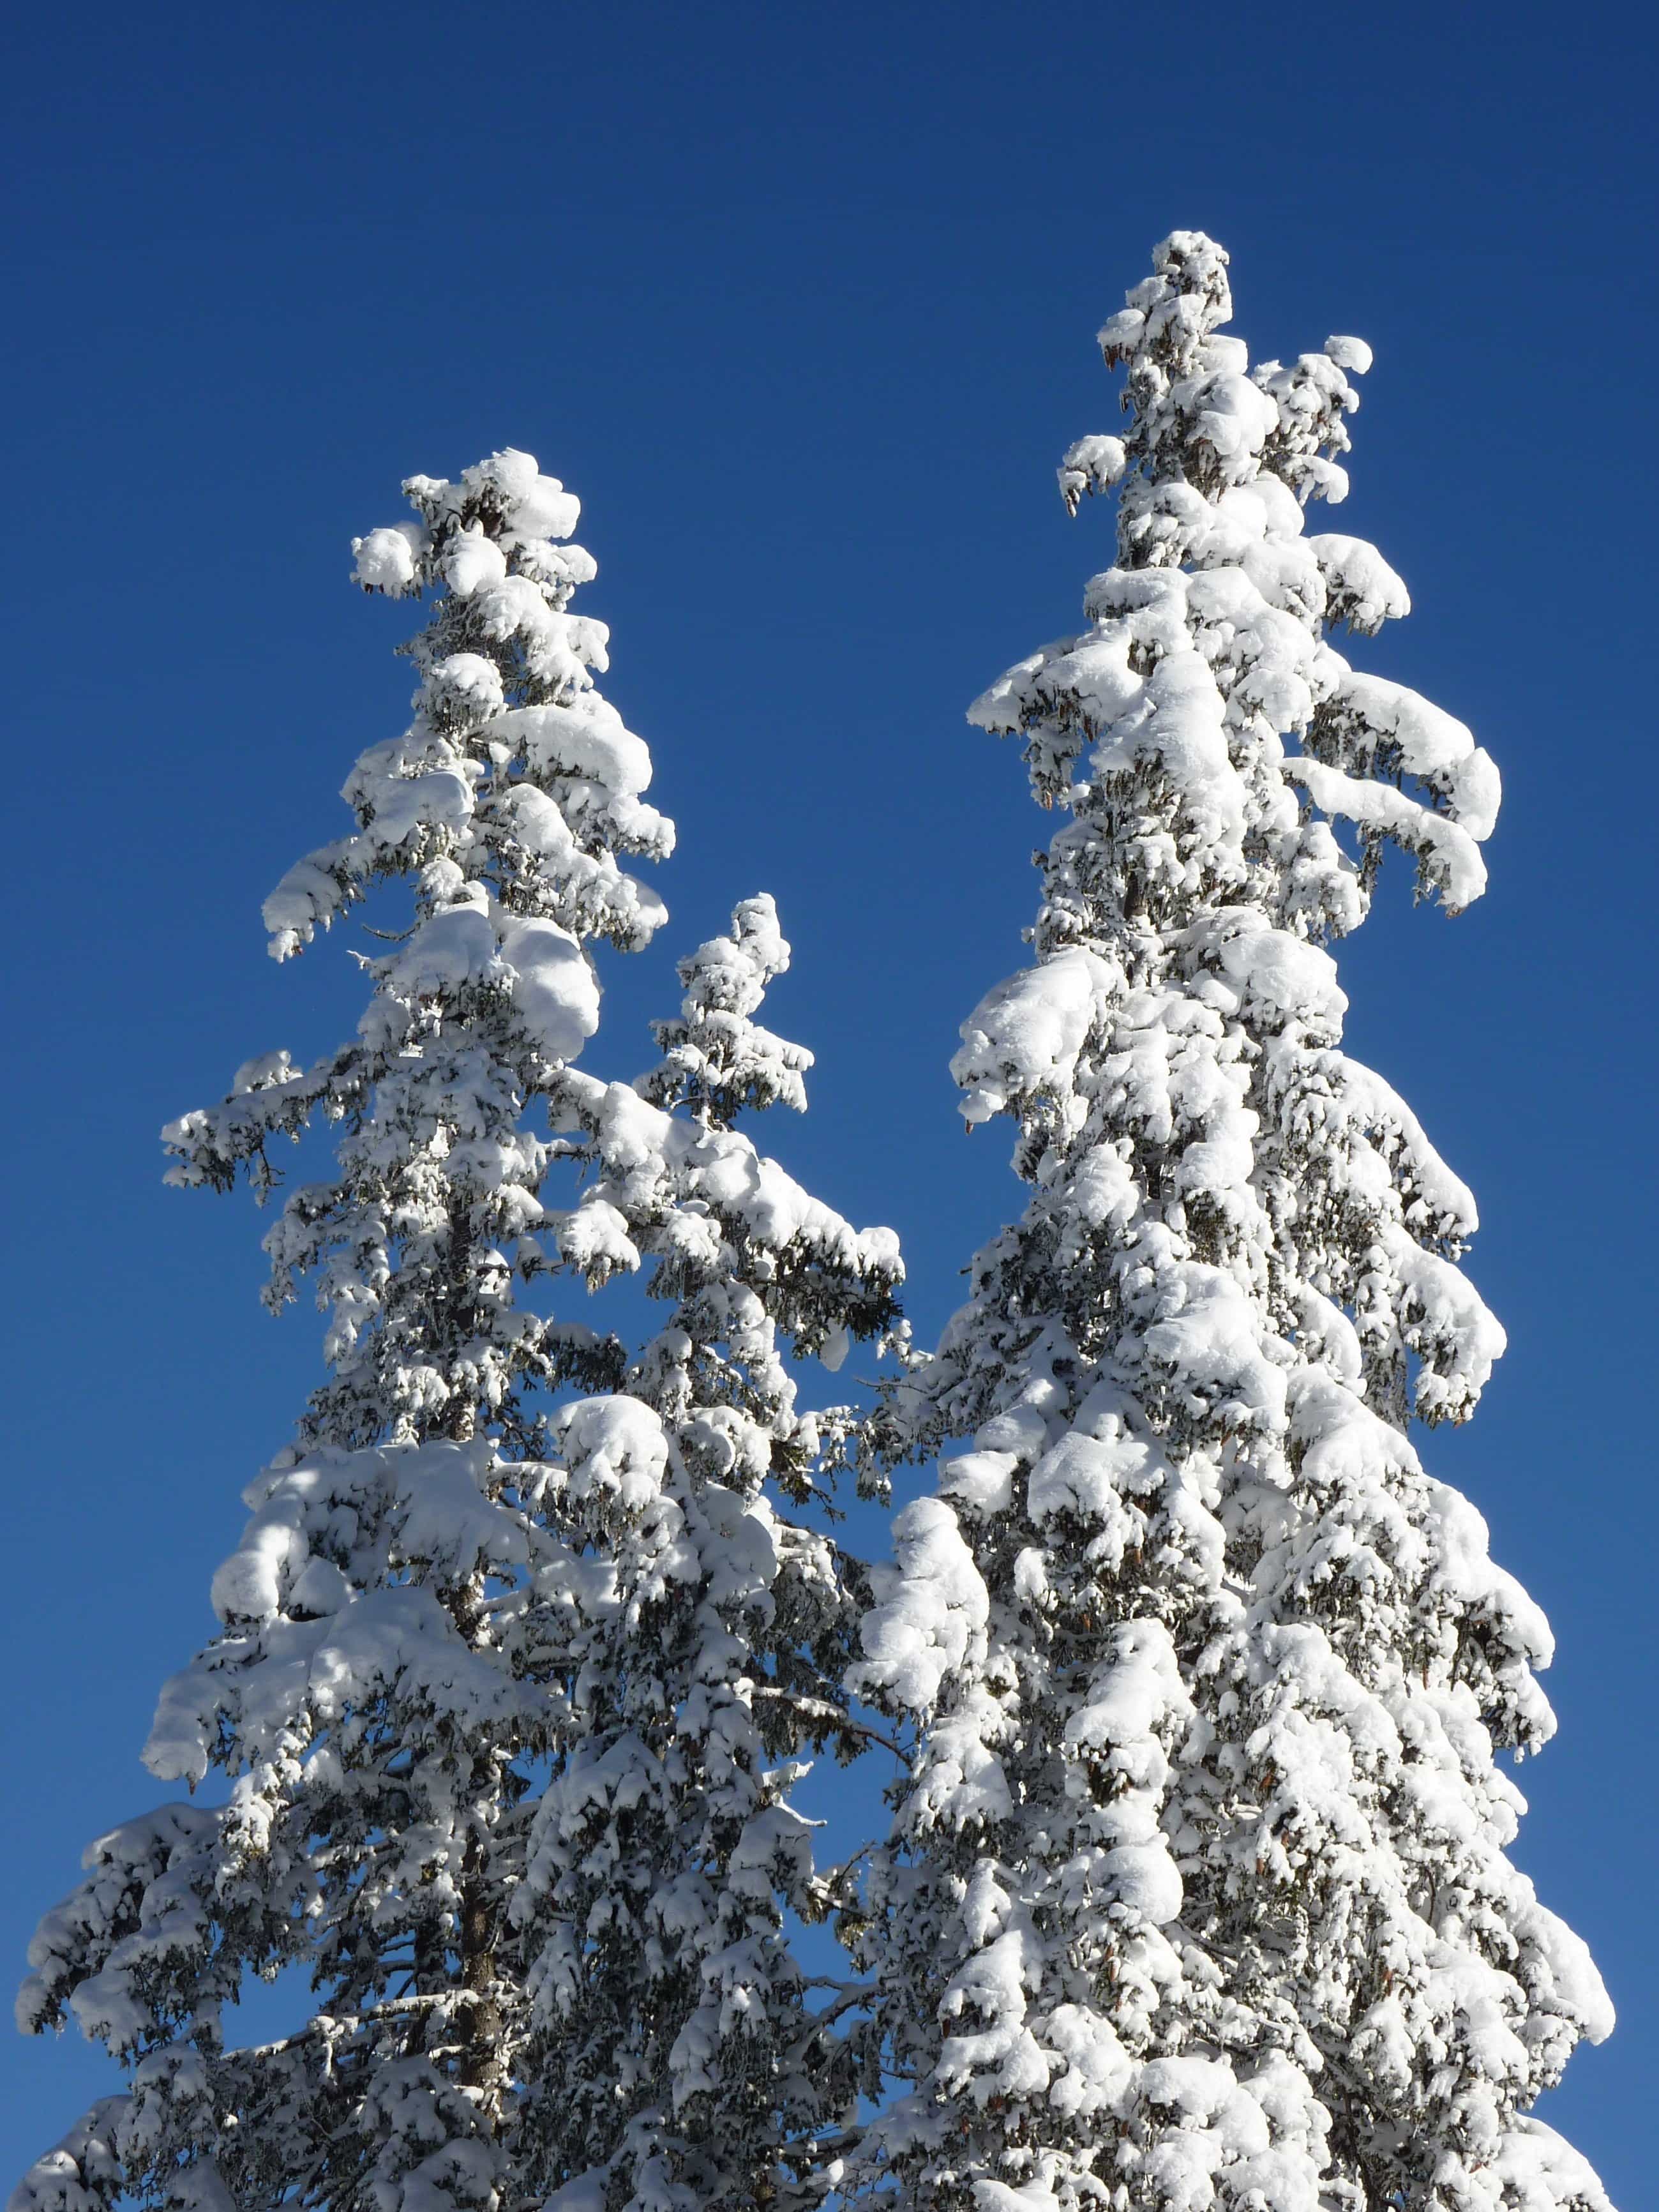 Free picture: hill, blue sky, snow, conifer, climate, winter, frost ...